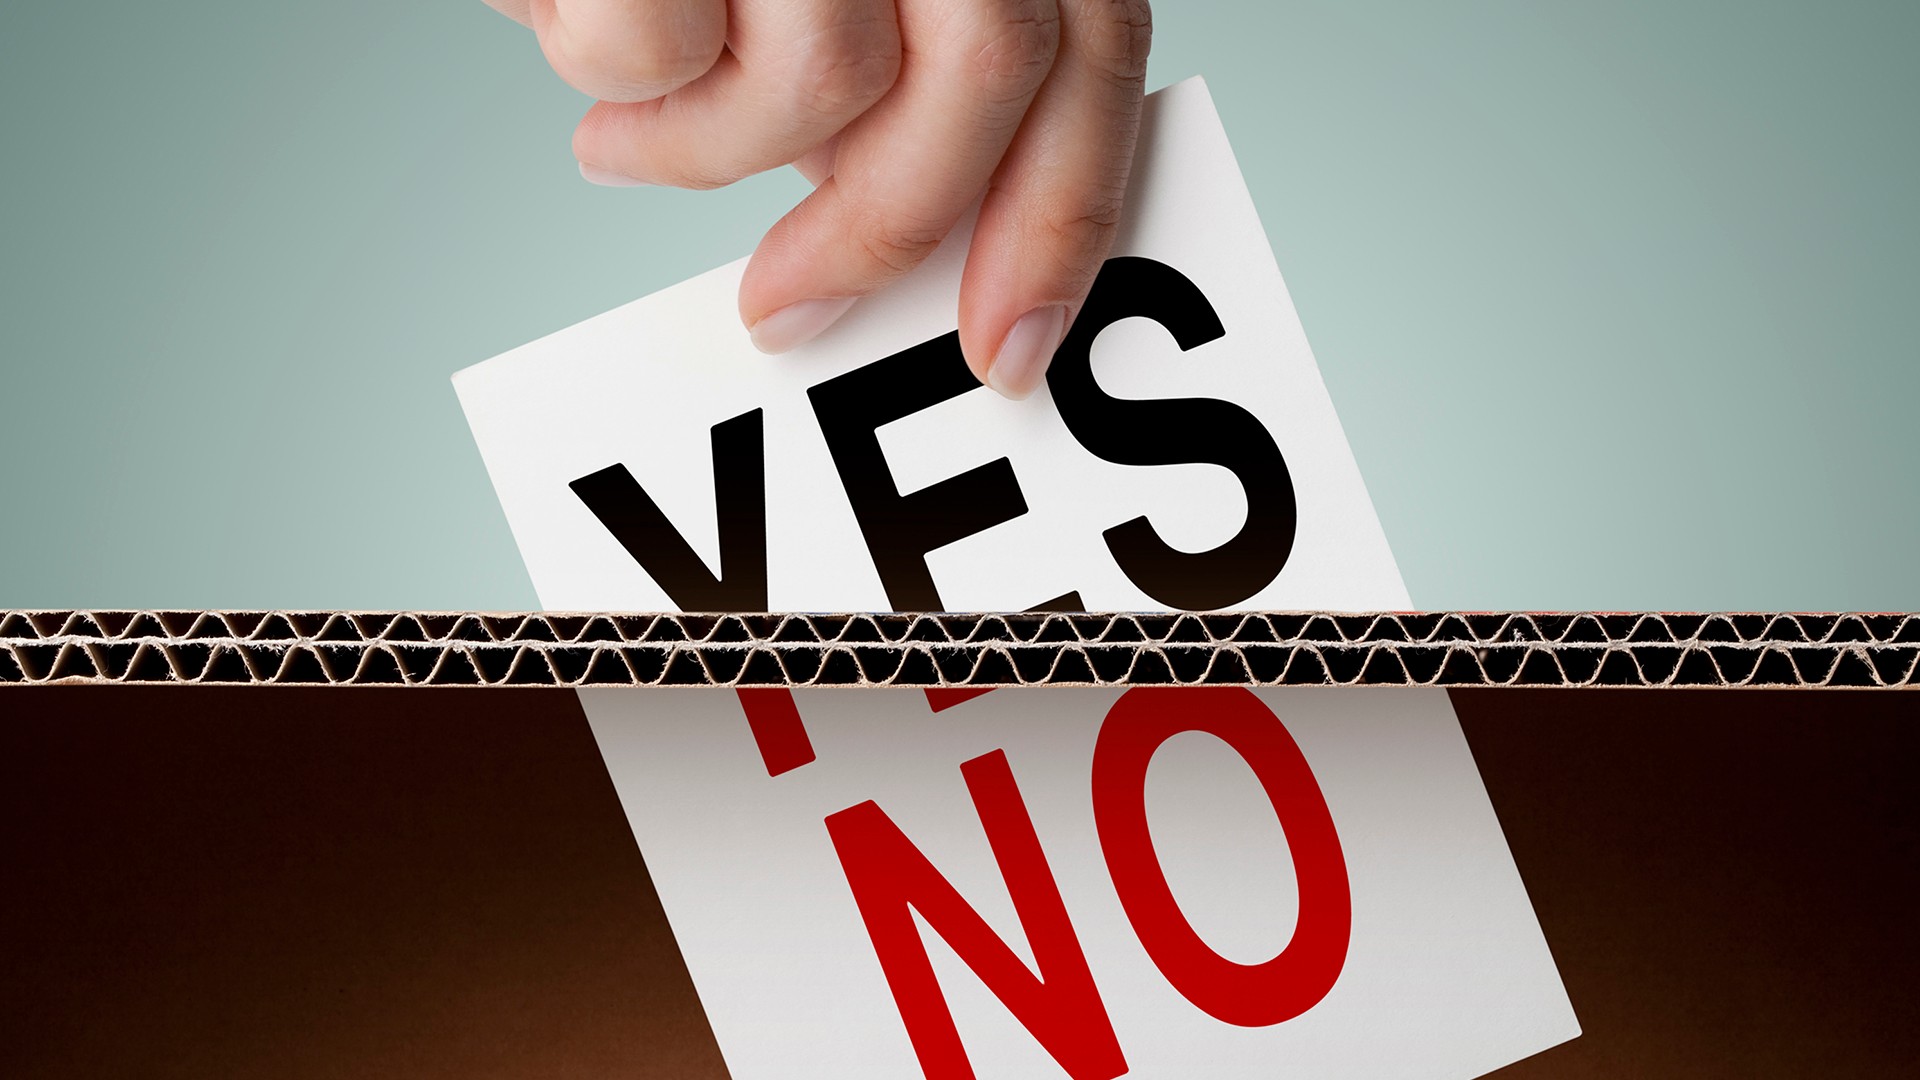 An image of a piece of paper, with the words "Yes" and "No" on being inserted into a carboard box.